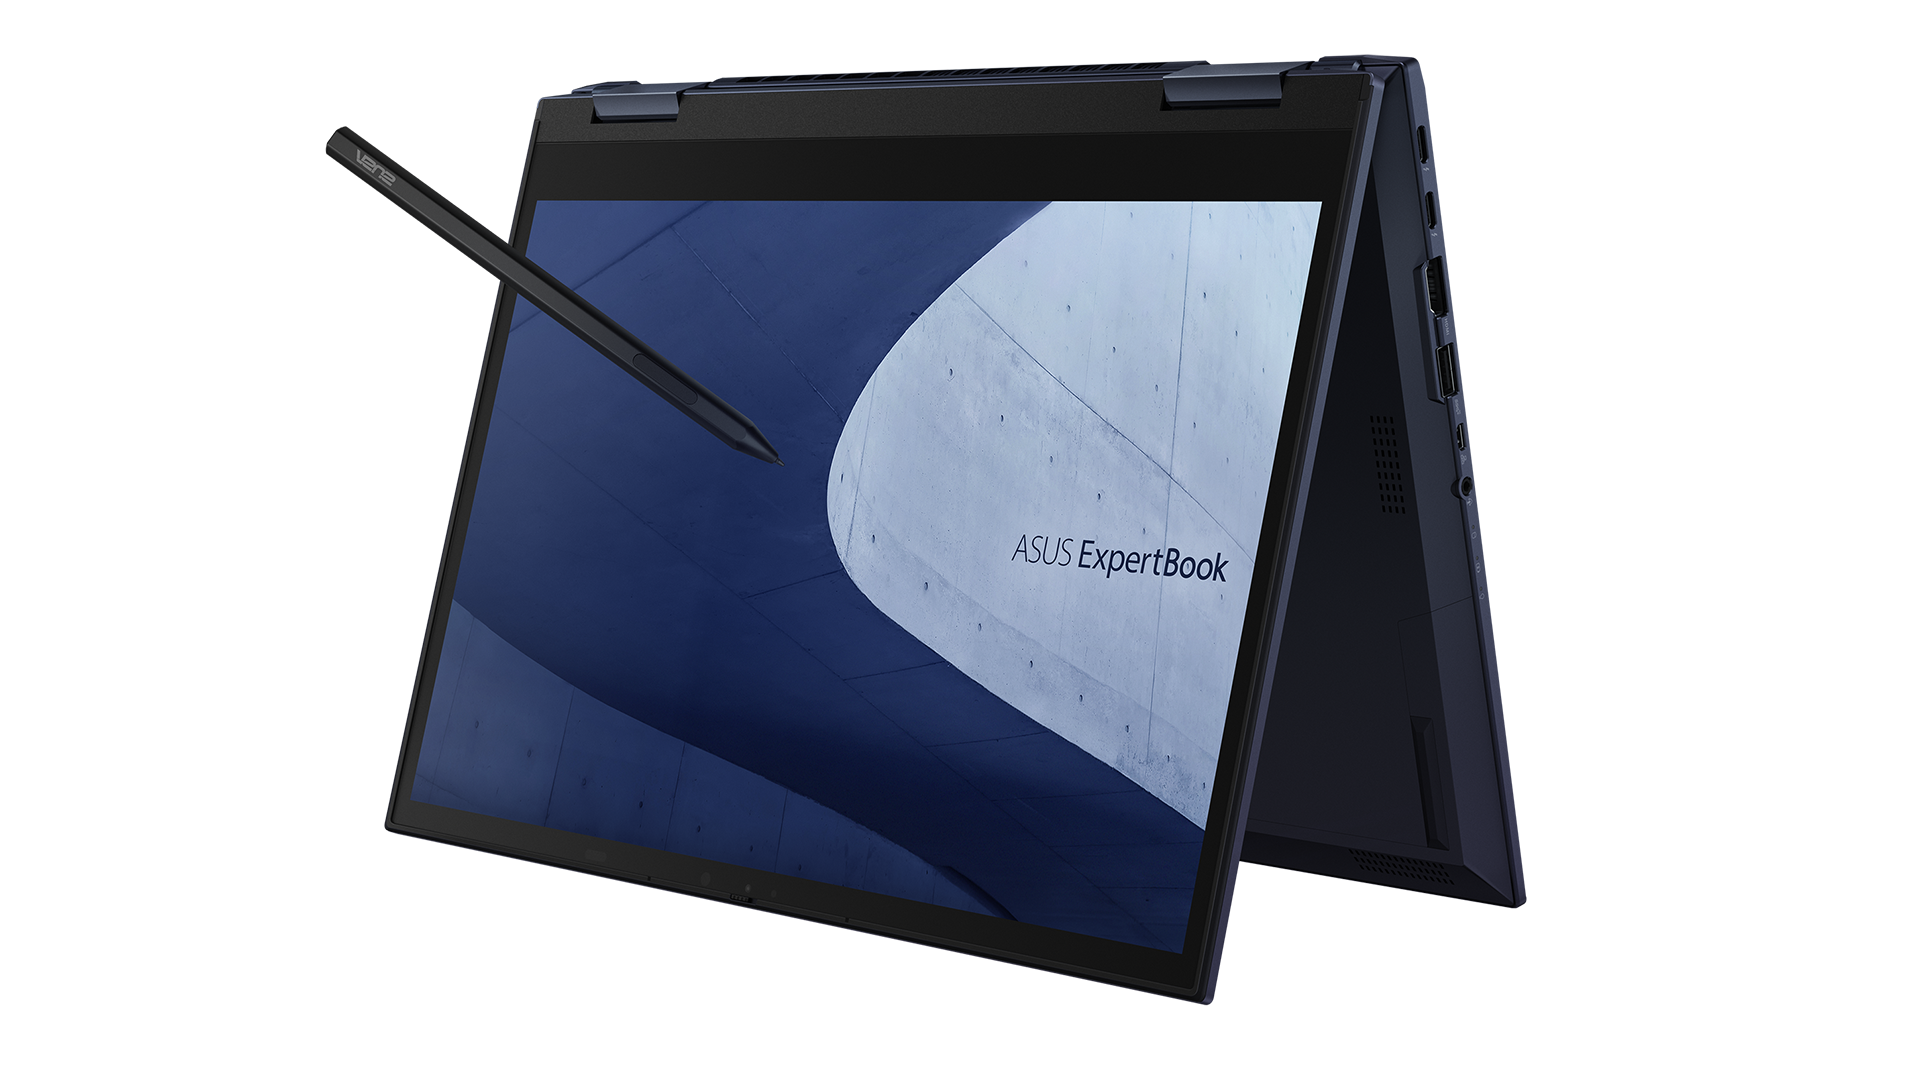 ASUS ExpertBook B7 Flip laptop in tablet mode with a stylus.